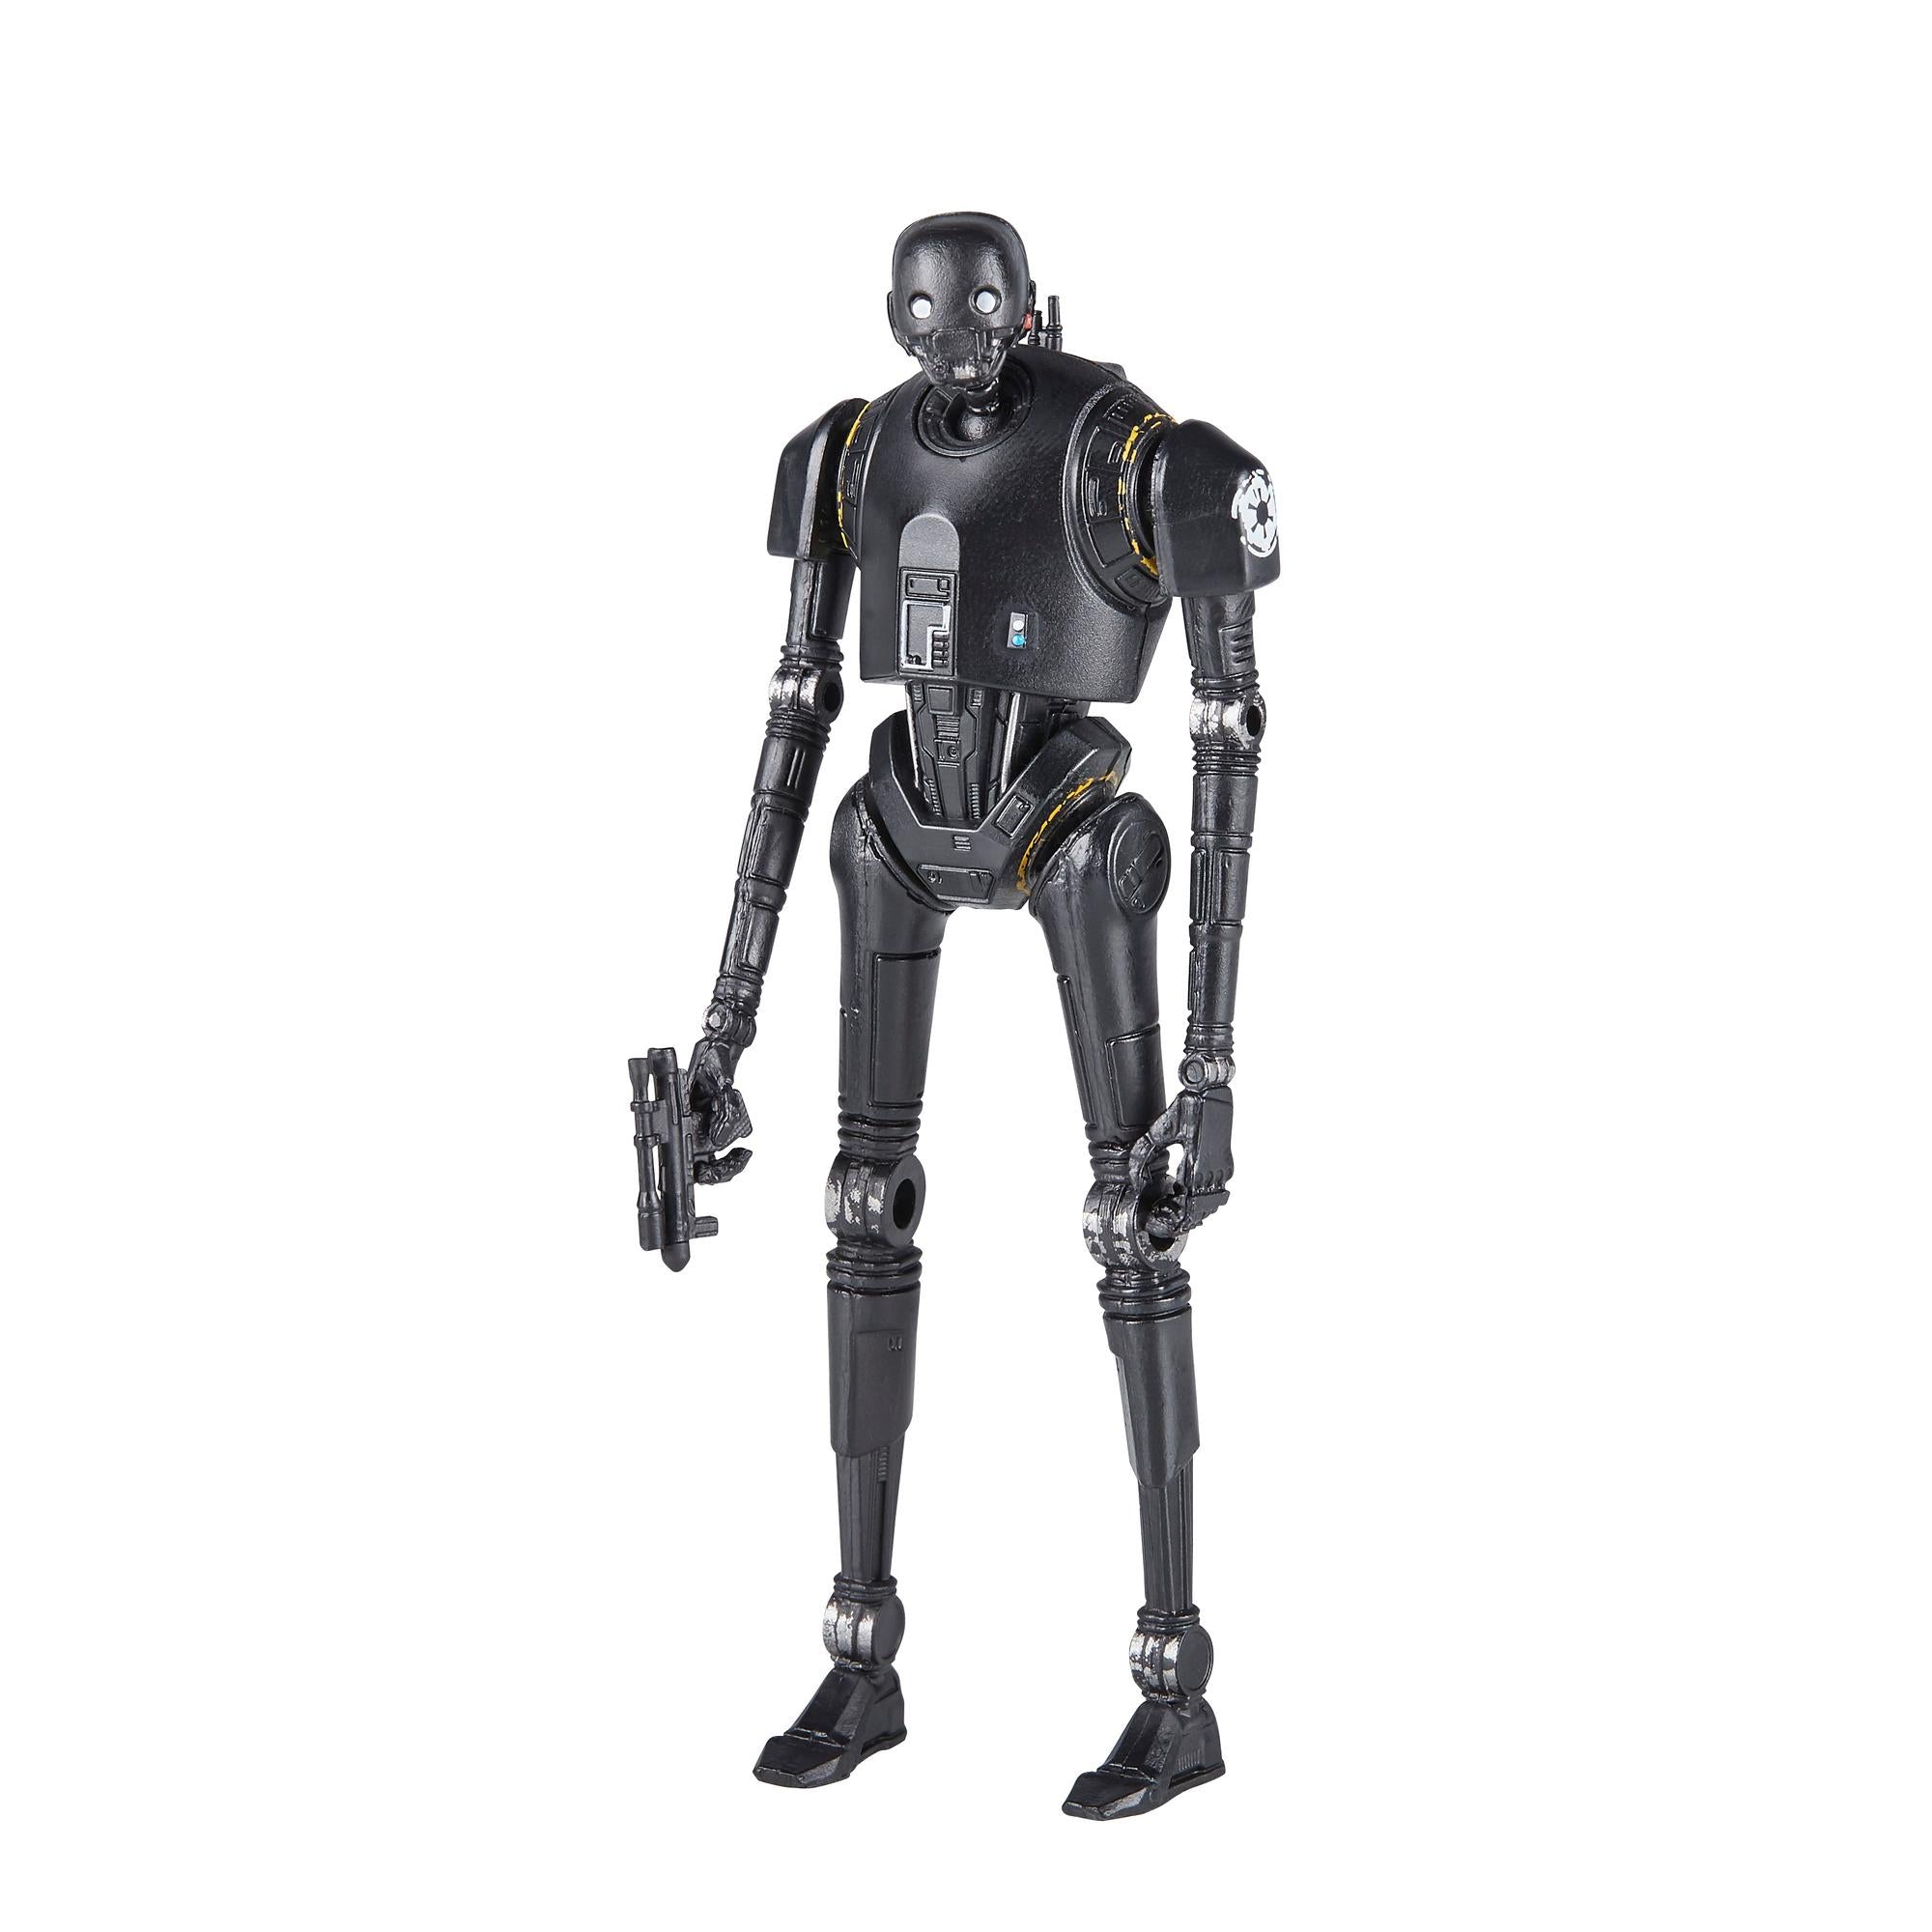 Star Wars Solo Movie Force Link 2.0 3.75" K-2SO-2